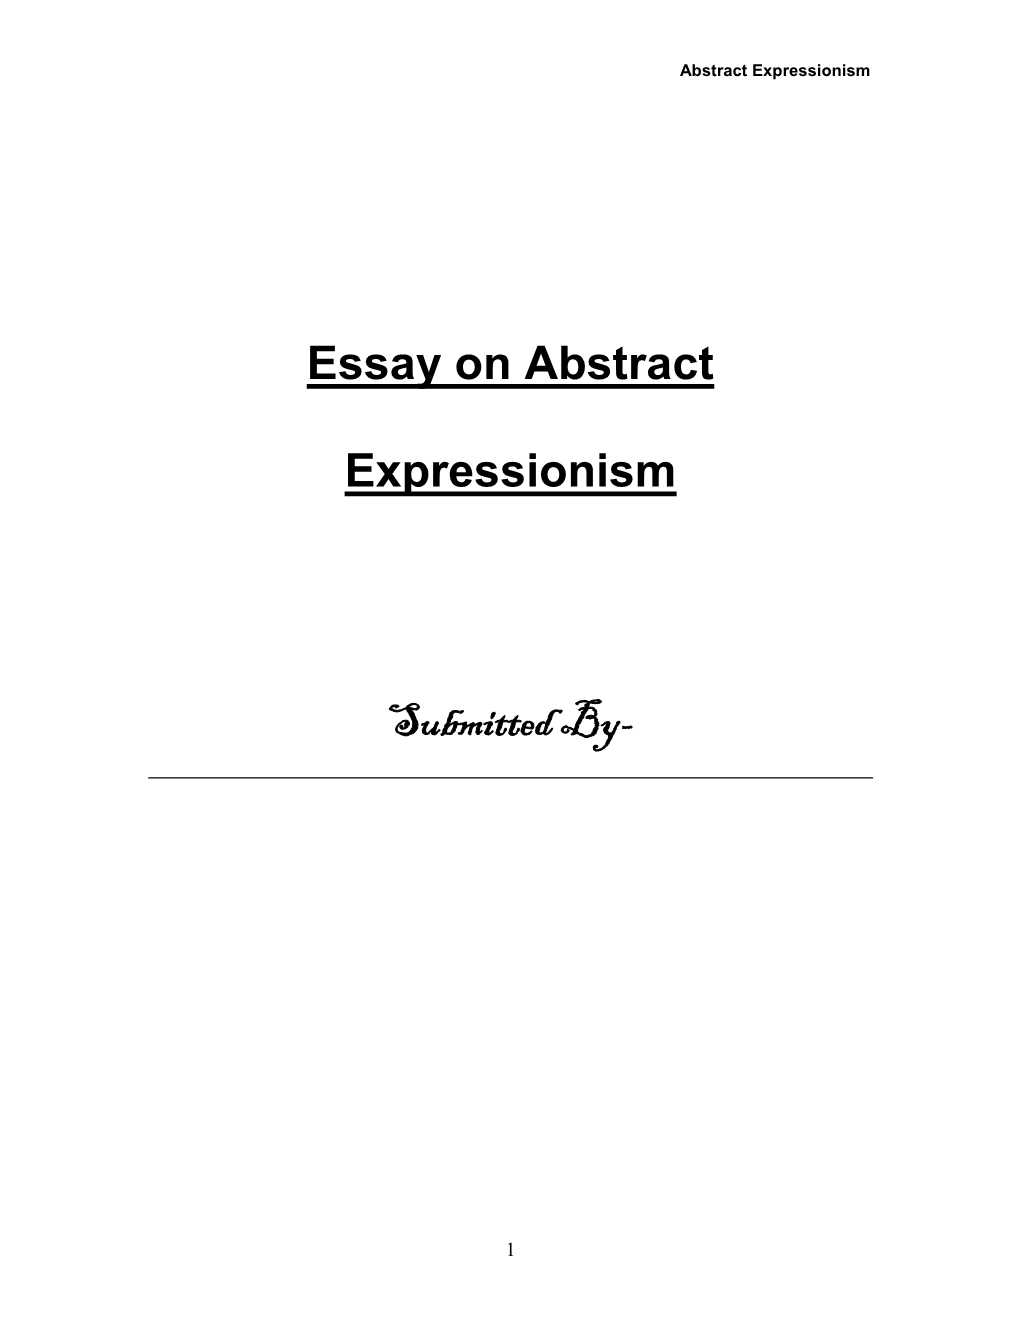 Essay on Abstract Expressionism Submitted